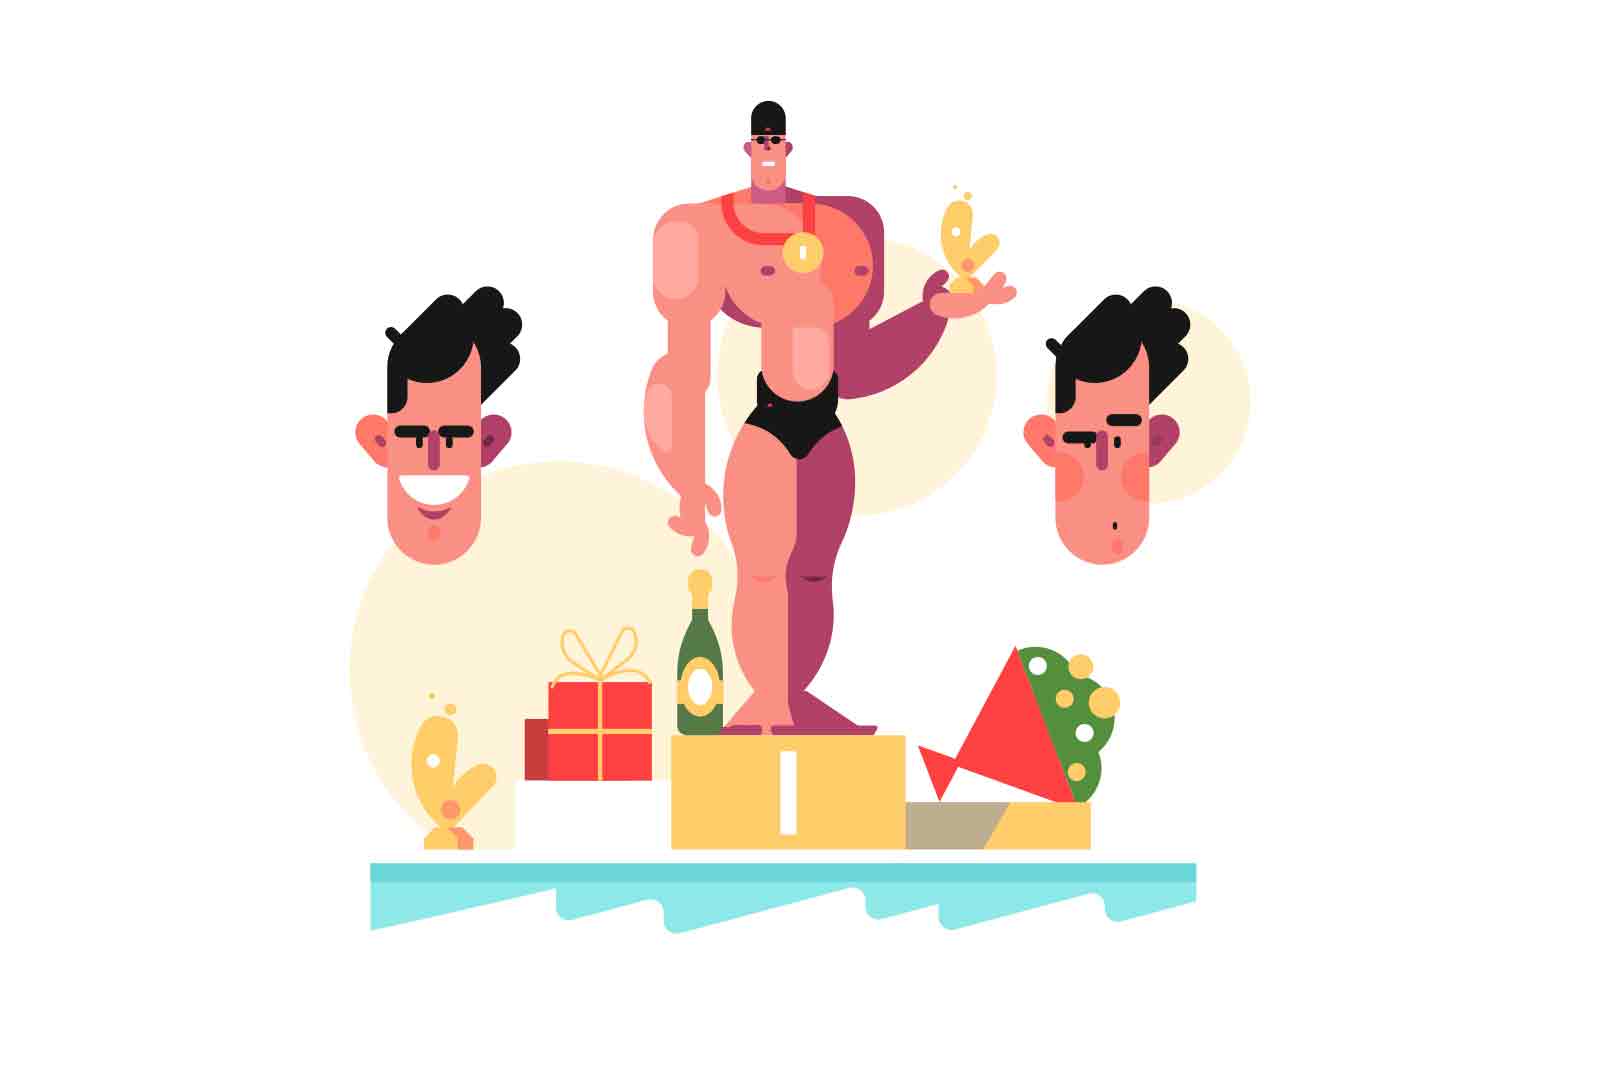 Swimmer on pedestal with gold cup in hand, vector illustration. Swimming competition concept.